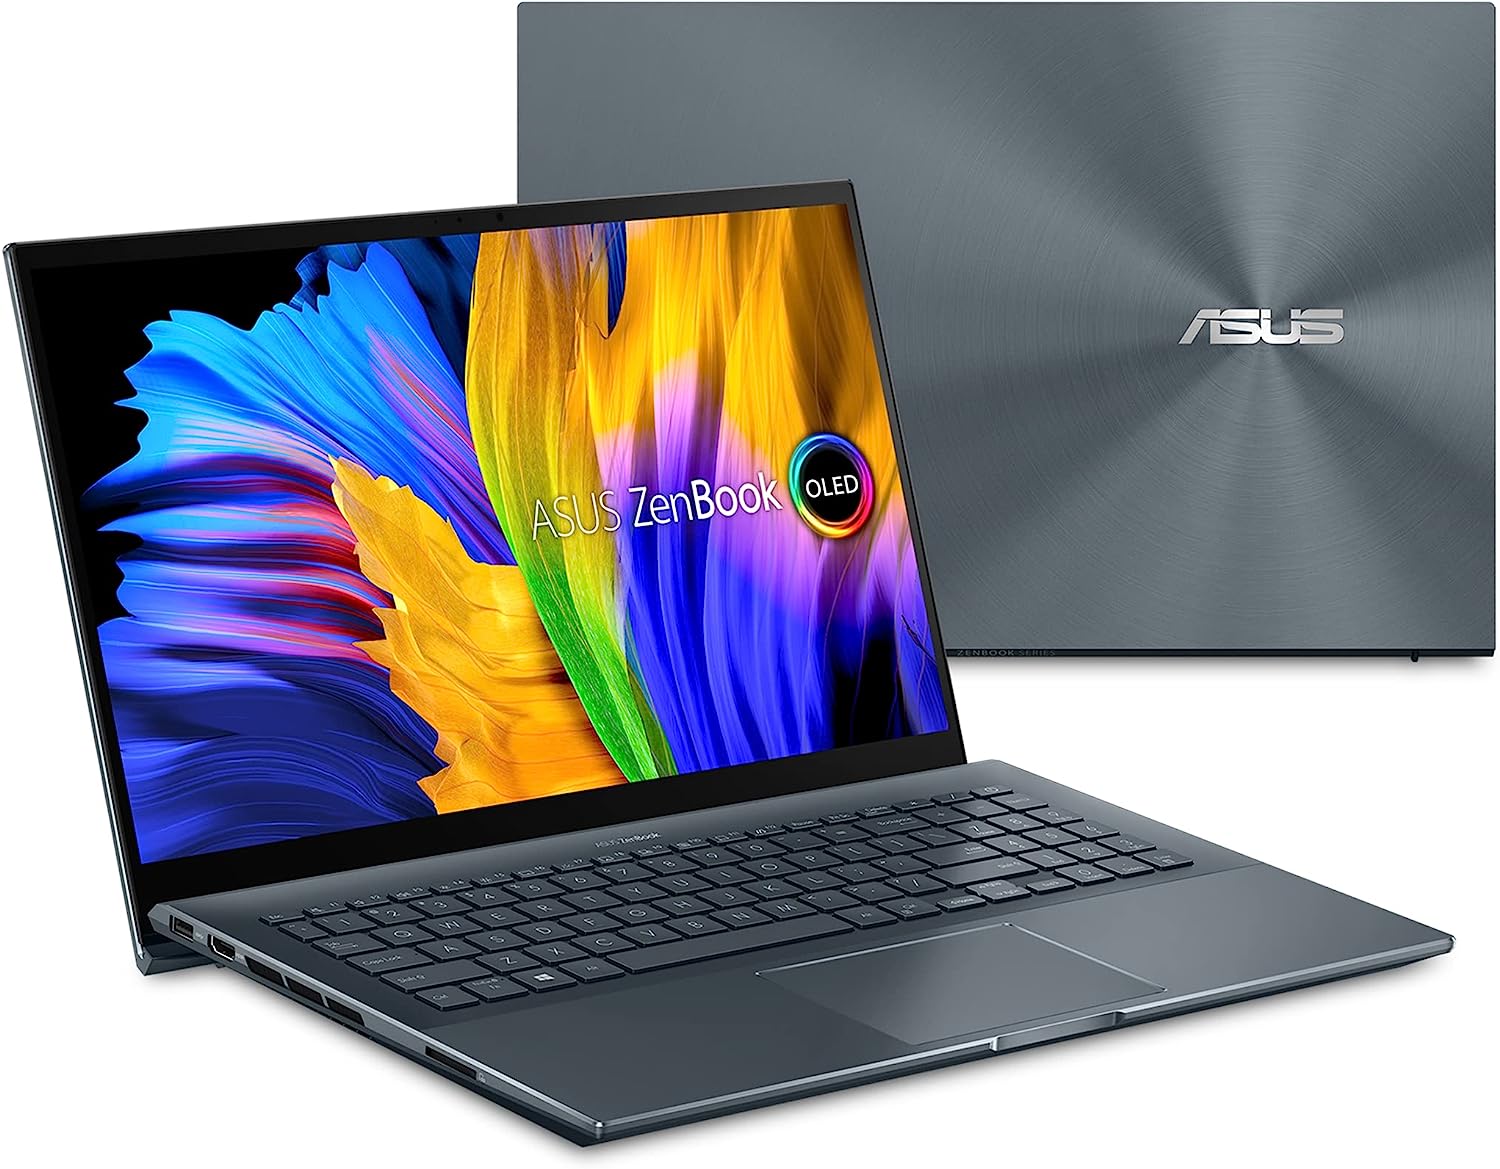 ASUS ZenBook Pro 15 OLED Laptop 15.6” FHD Touch [...]